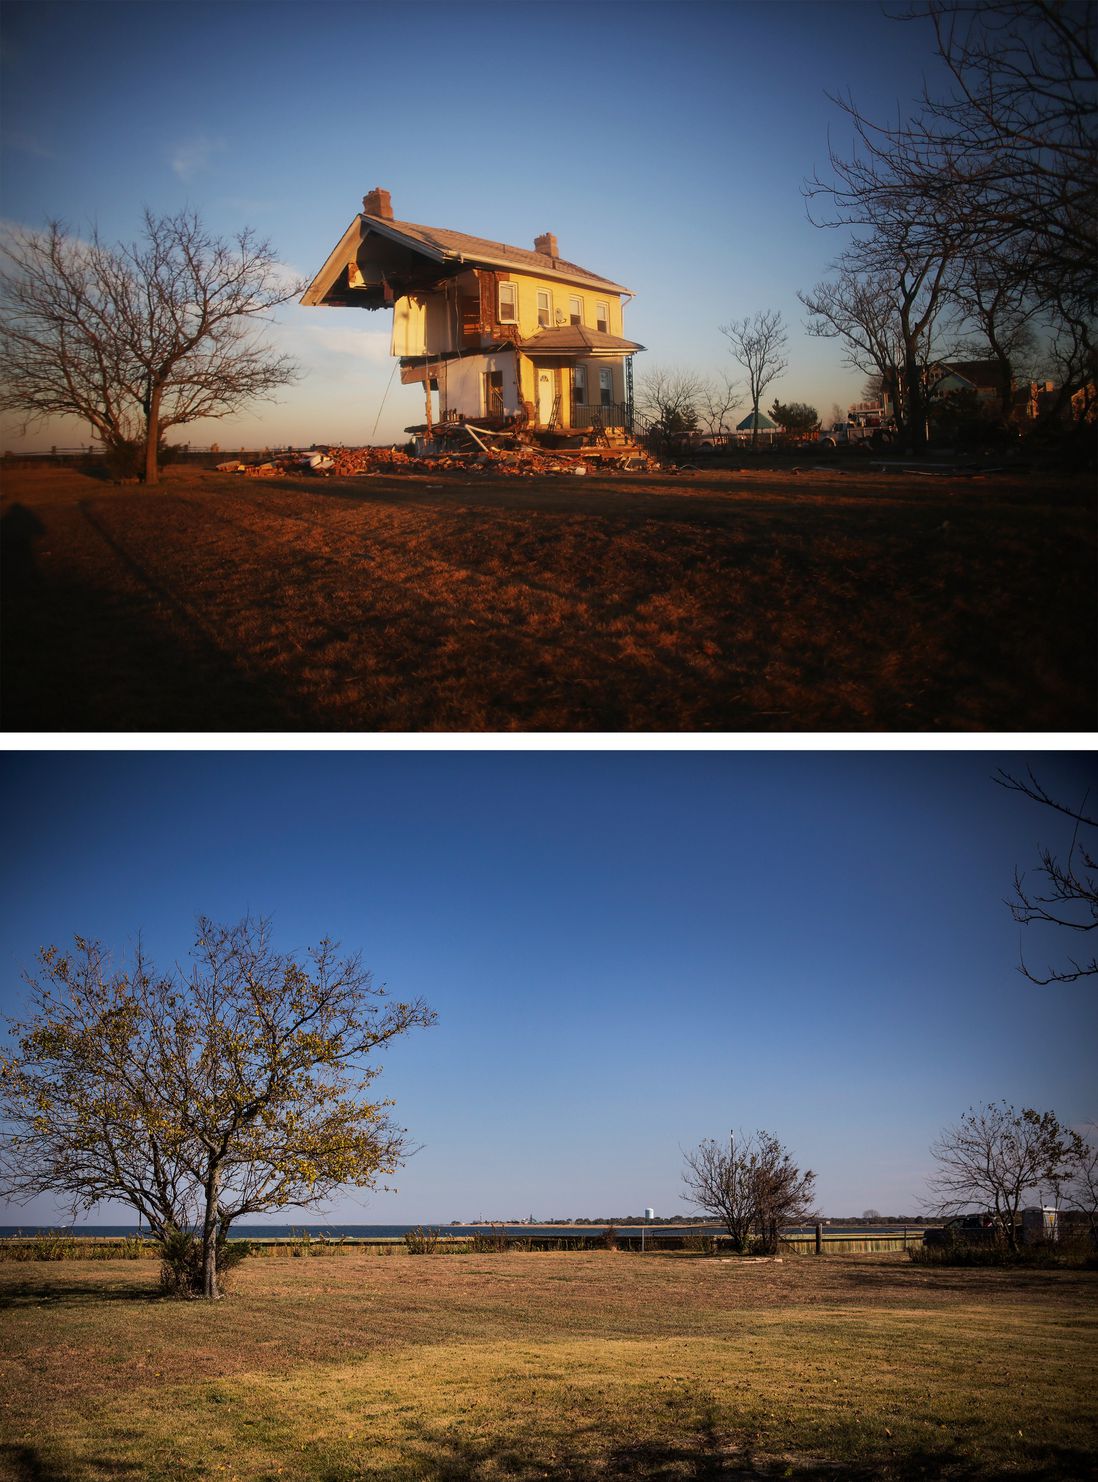 [Top] The iconic Princess Cottage, built in 1855, remains standing after being ravaged by flooding caused by Superstorm Sandy November 21, 2012 in Union Beach, New Jersey. [Bottom] The spot where the Princess Cottage used to be is shown October 22, 2013 in Union Beach, New Jersey.